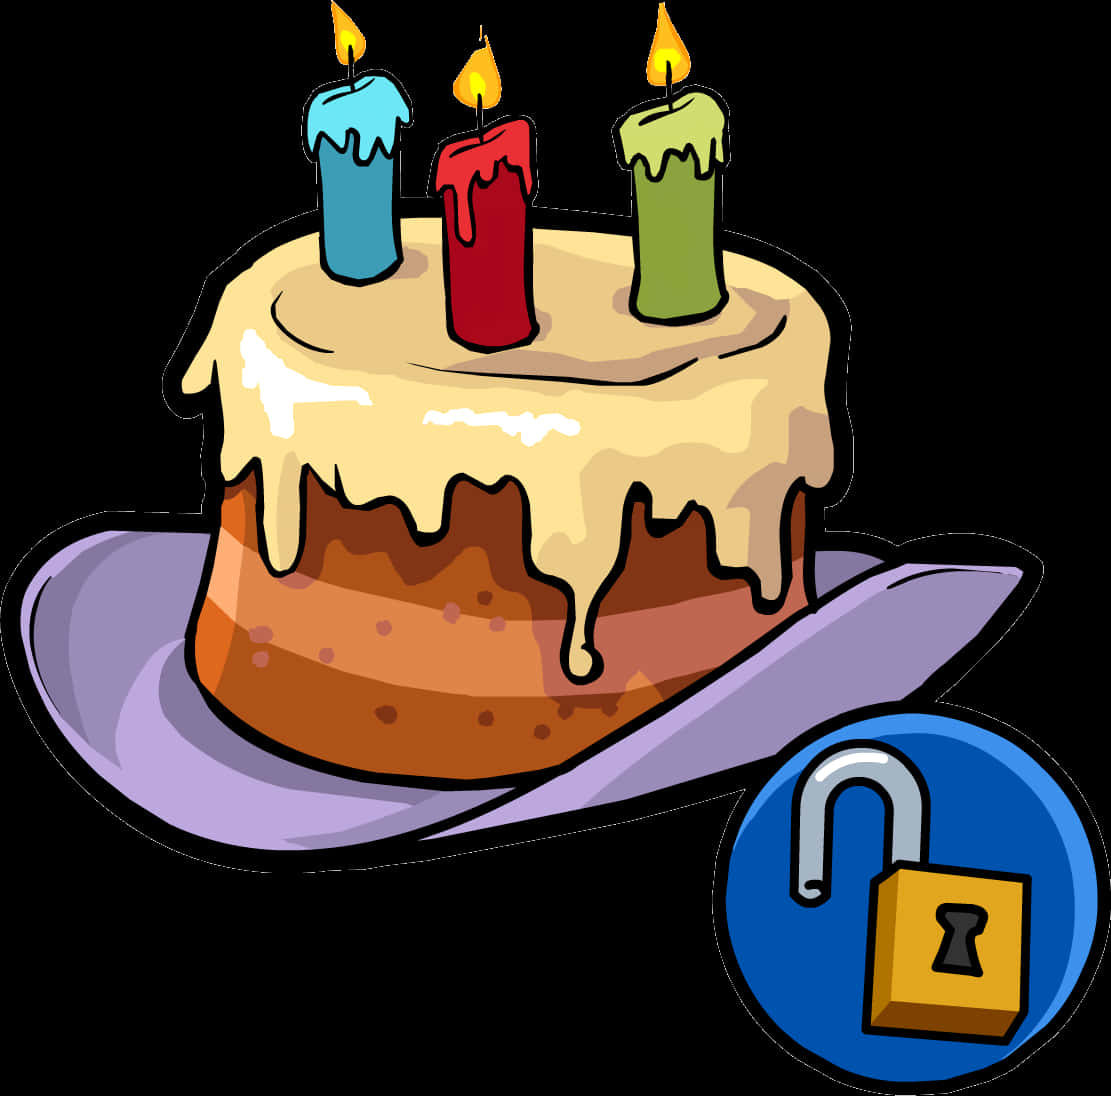 A Cartoon Of A Cake With Candles And A Lock